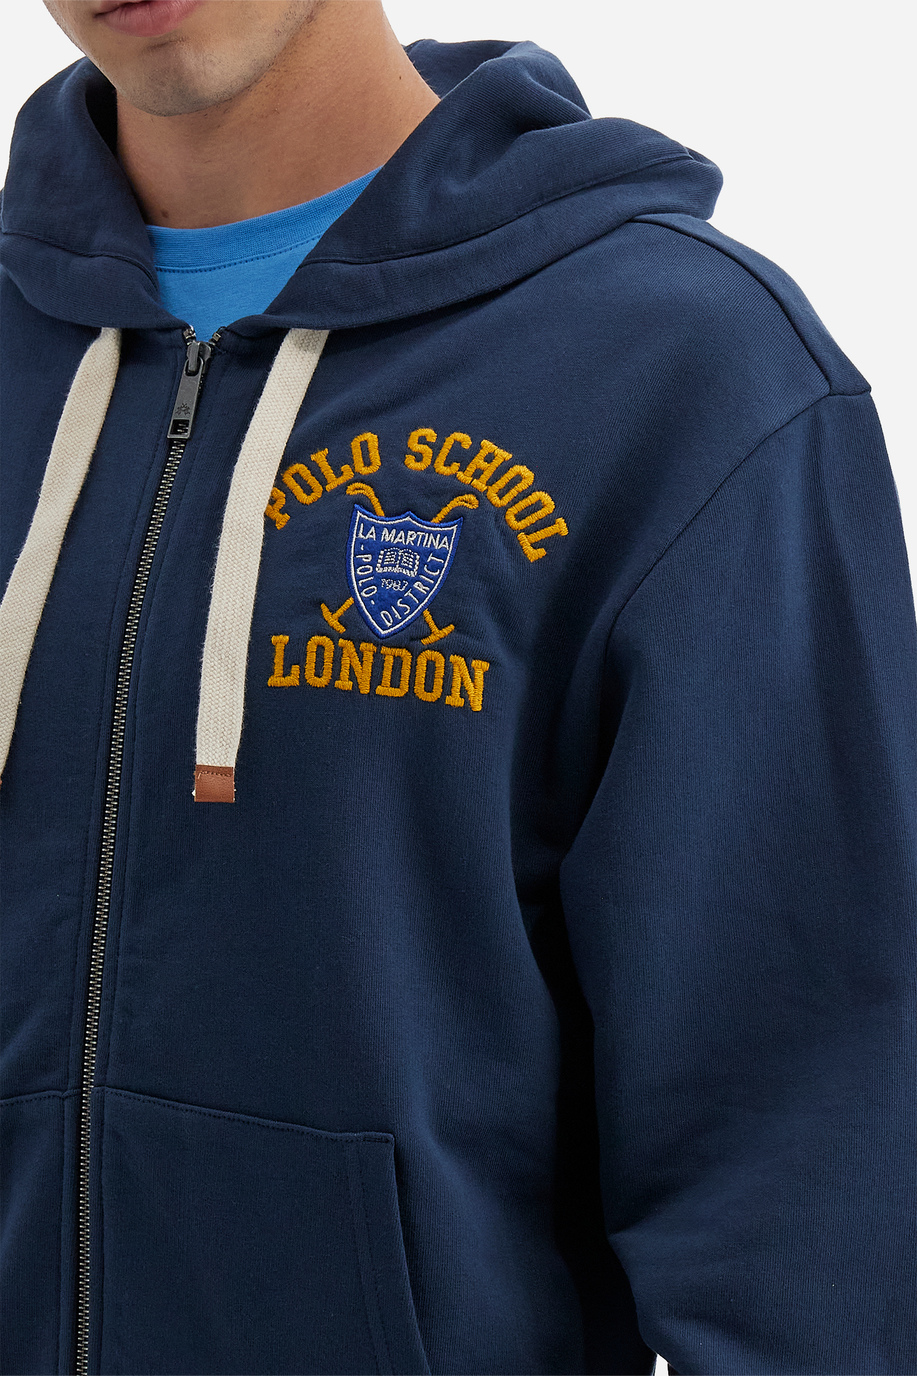 Polo Academy men's full zip hooded sweatshirt in solid color with small logo - Valoris - Polo Academy | La Martina - Official Online Shop